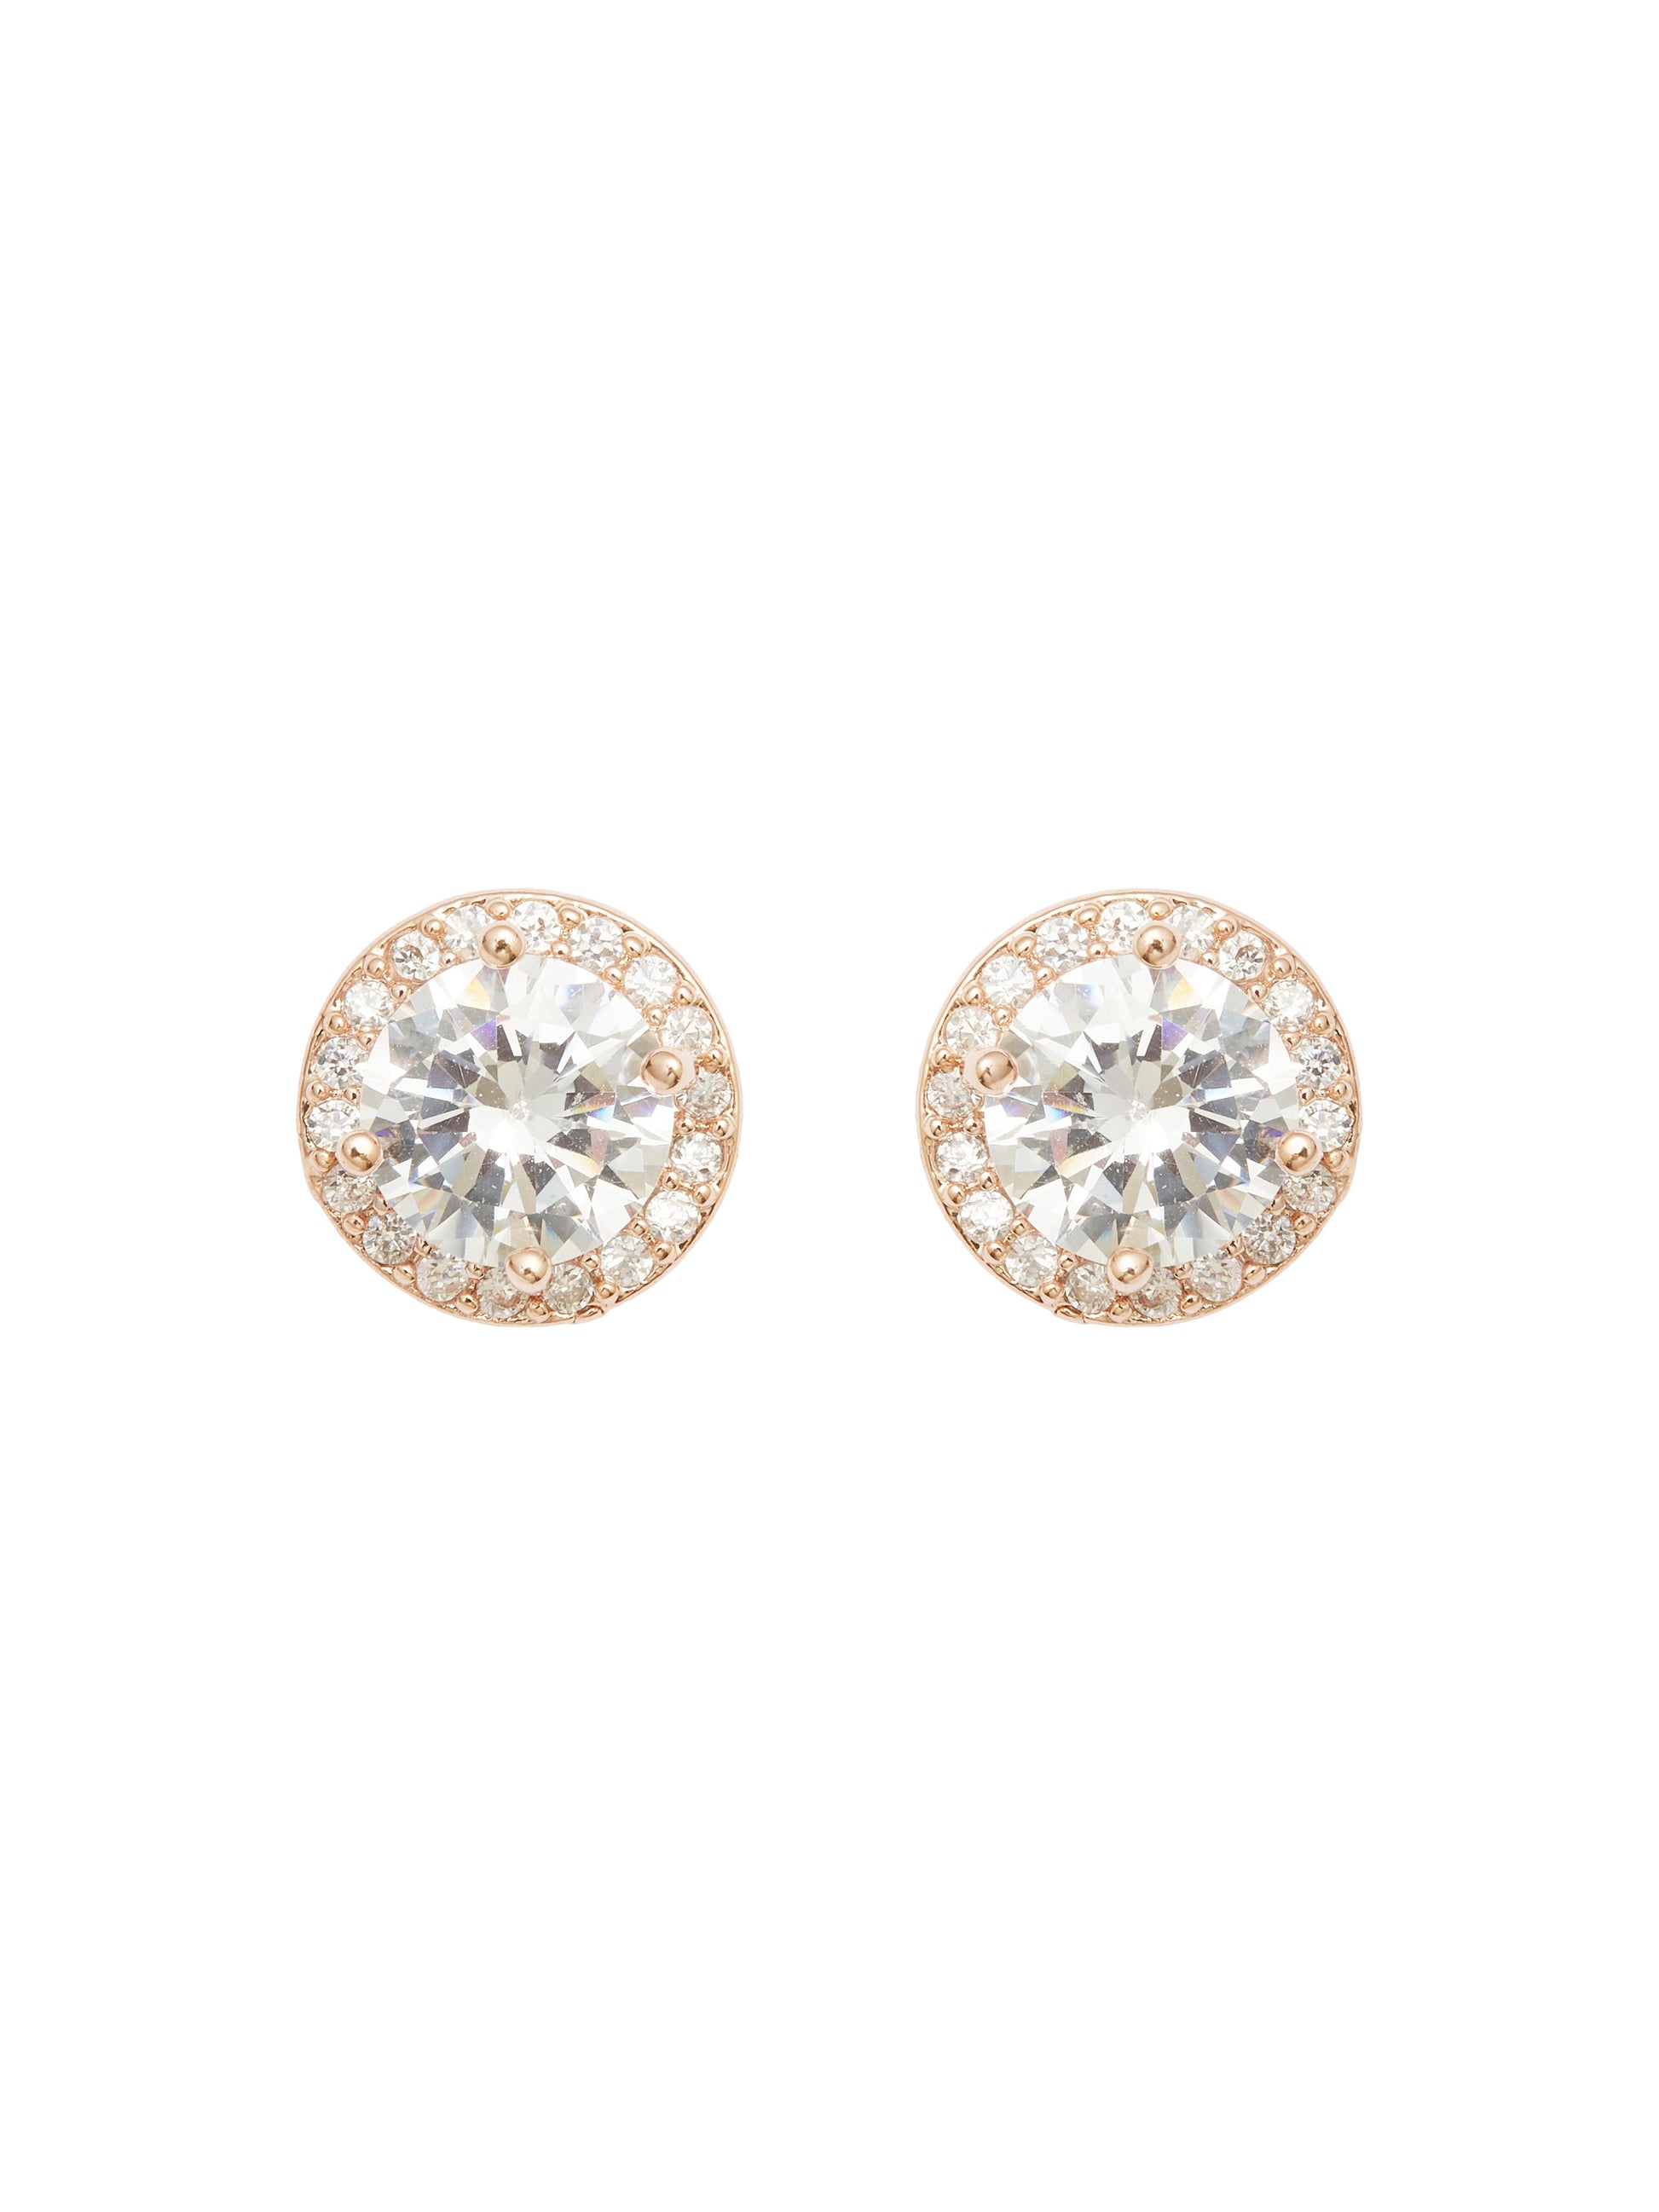 Rina Rose Gold Earrings by Montique